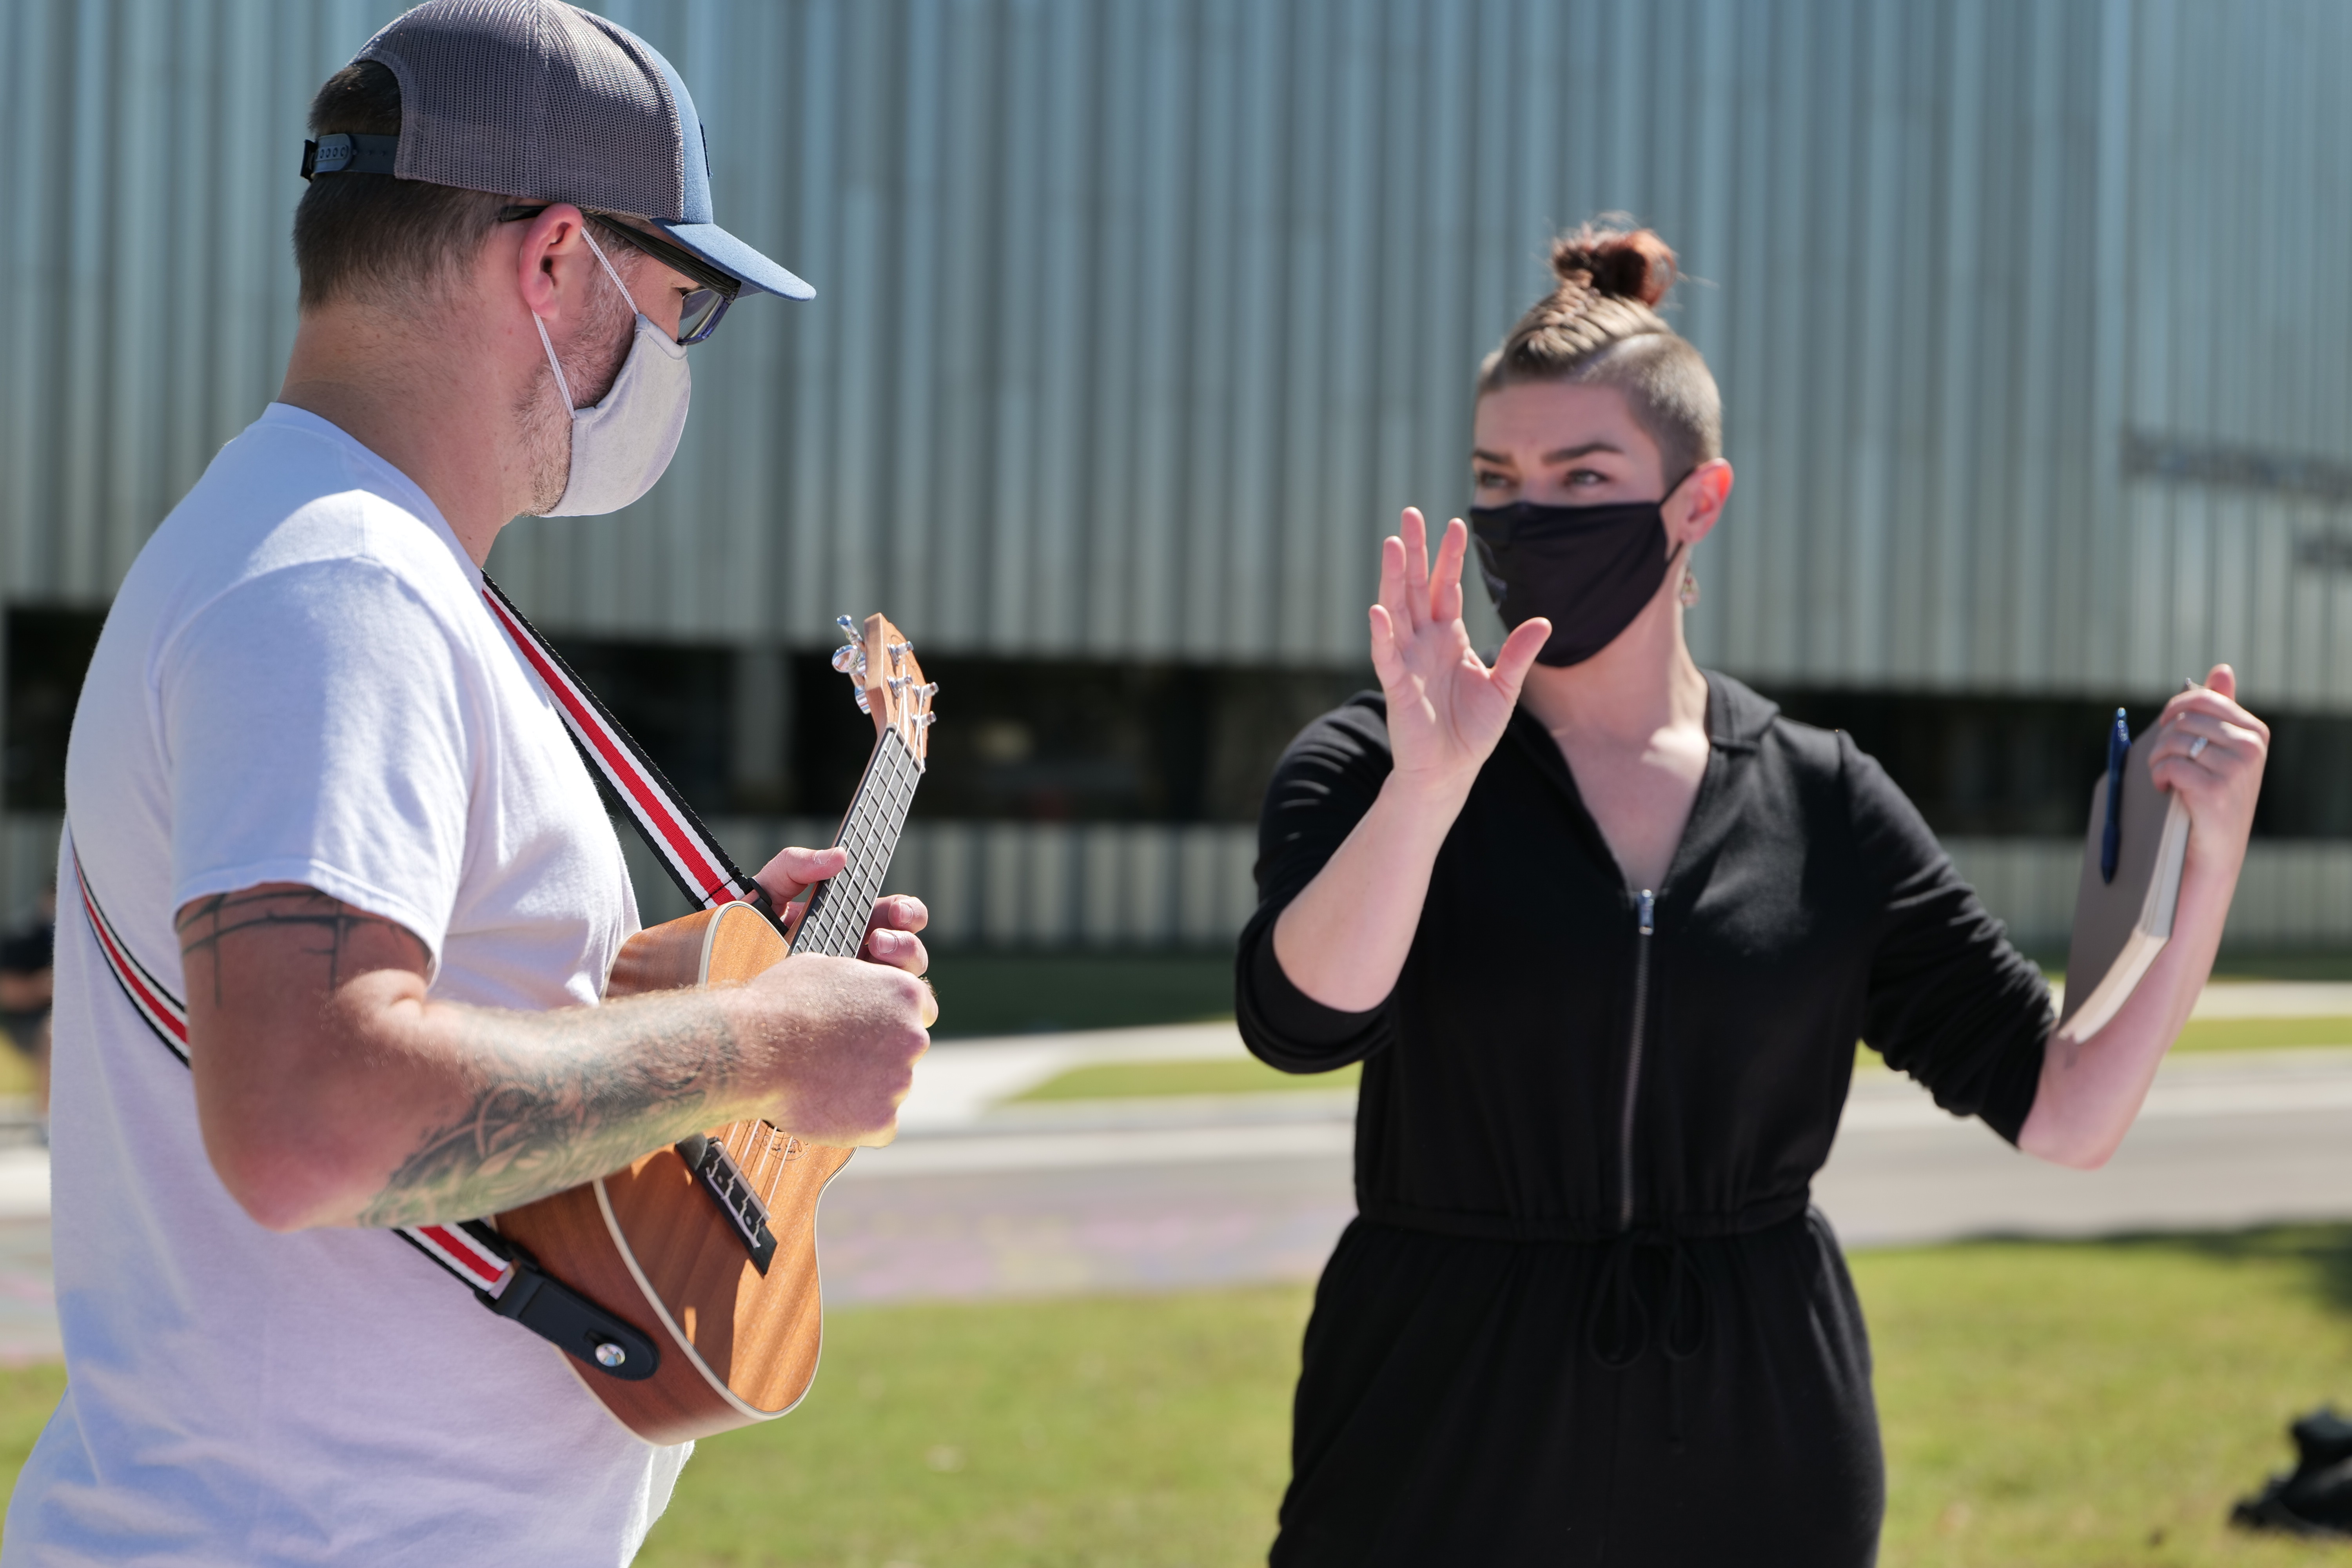 A masked figure holding an acoustic guitar takes direction from a masked figure dressed in black outdoors